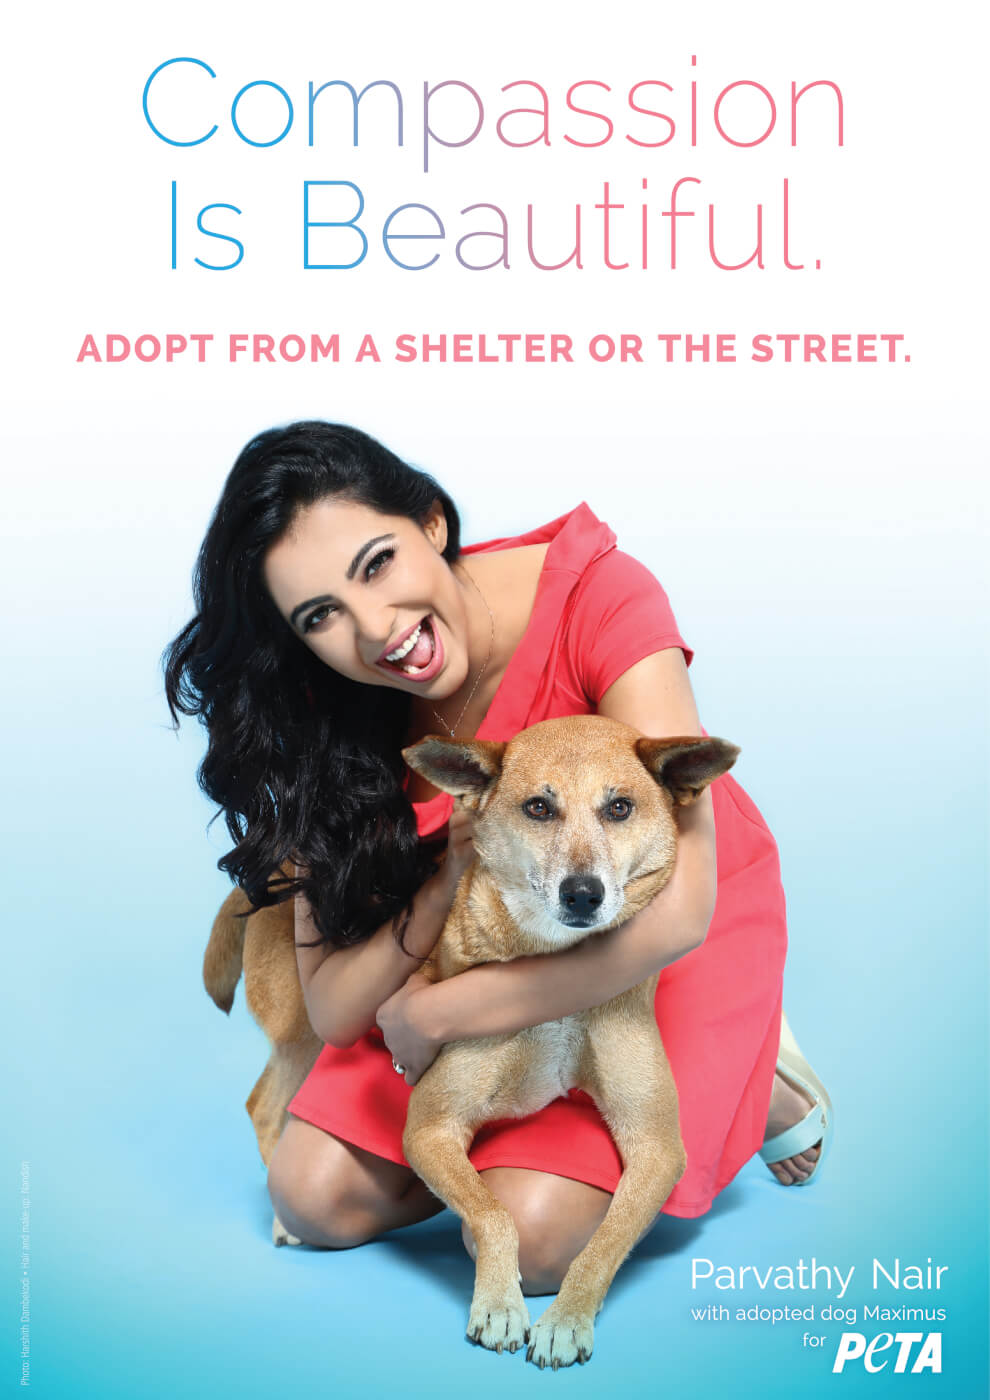 Actor Parvathy Nair Stars in New PETA Campaign Ahead Of World Spay Day